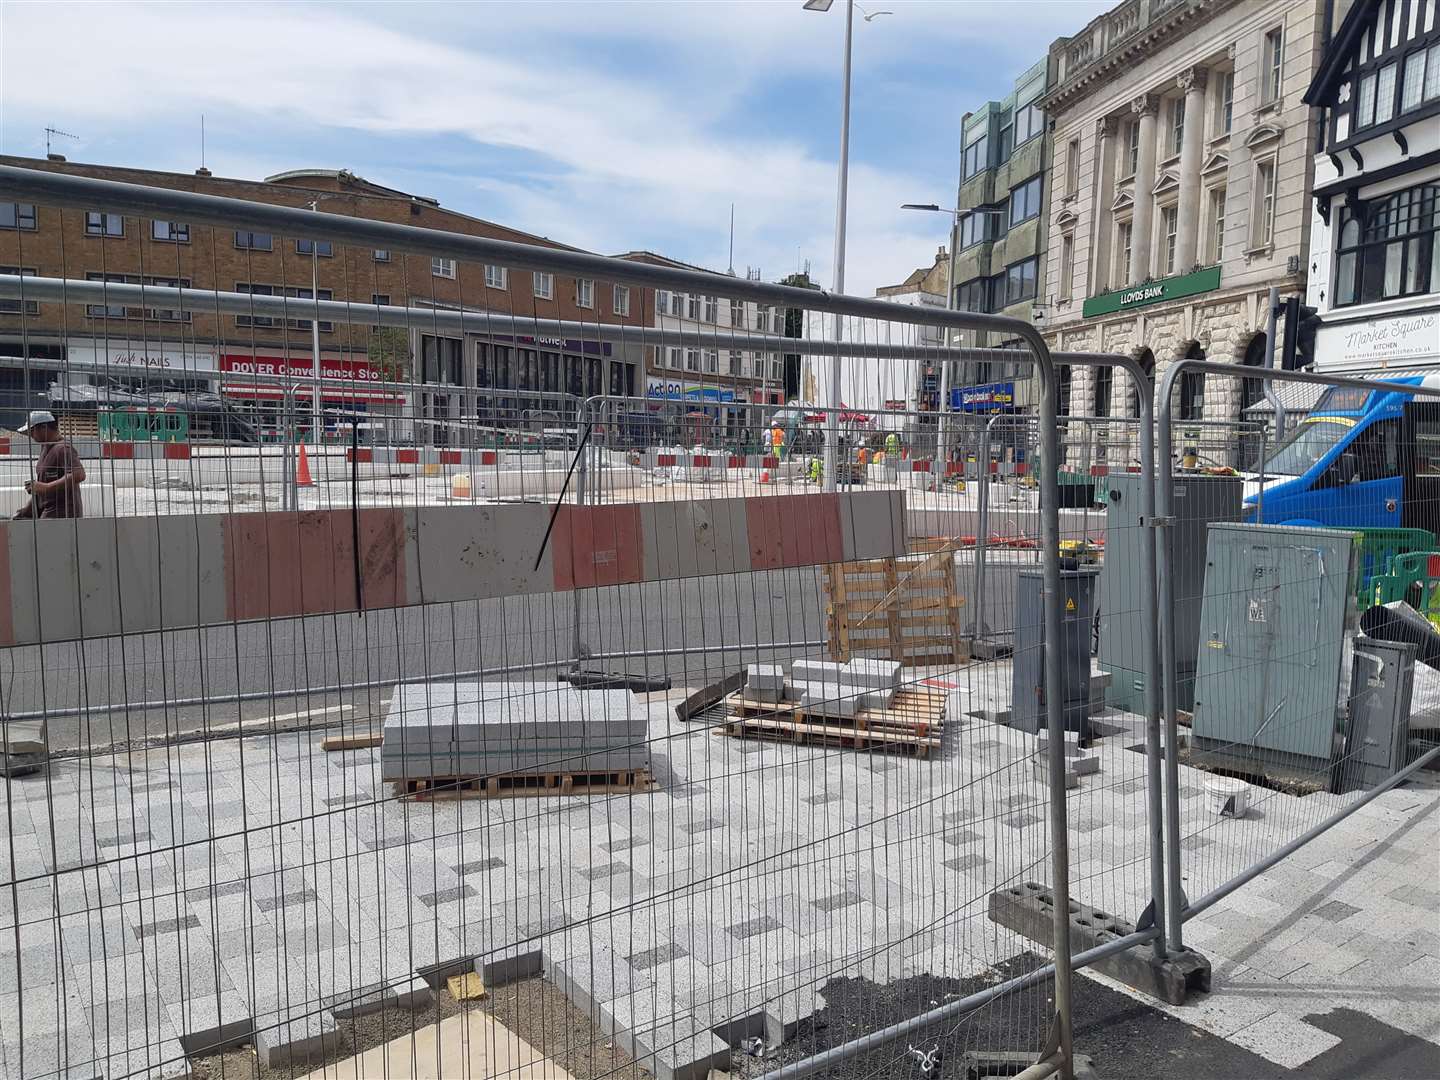 Fencing surrounds the ongoing works at Market Square in Dover